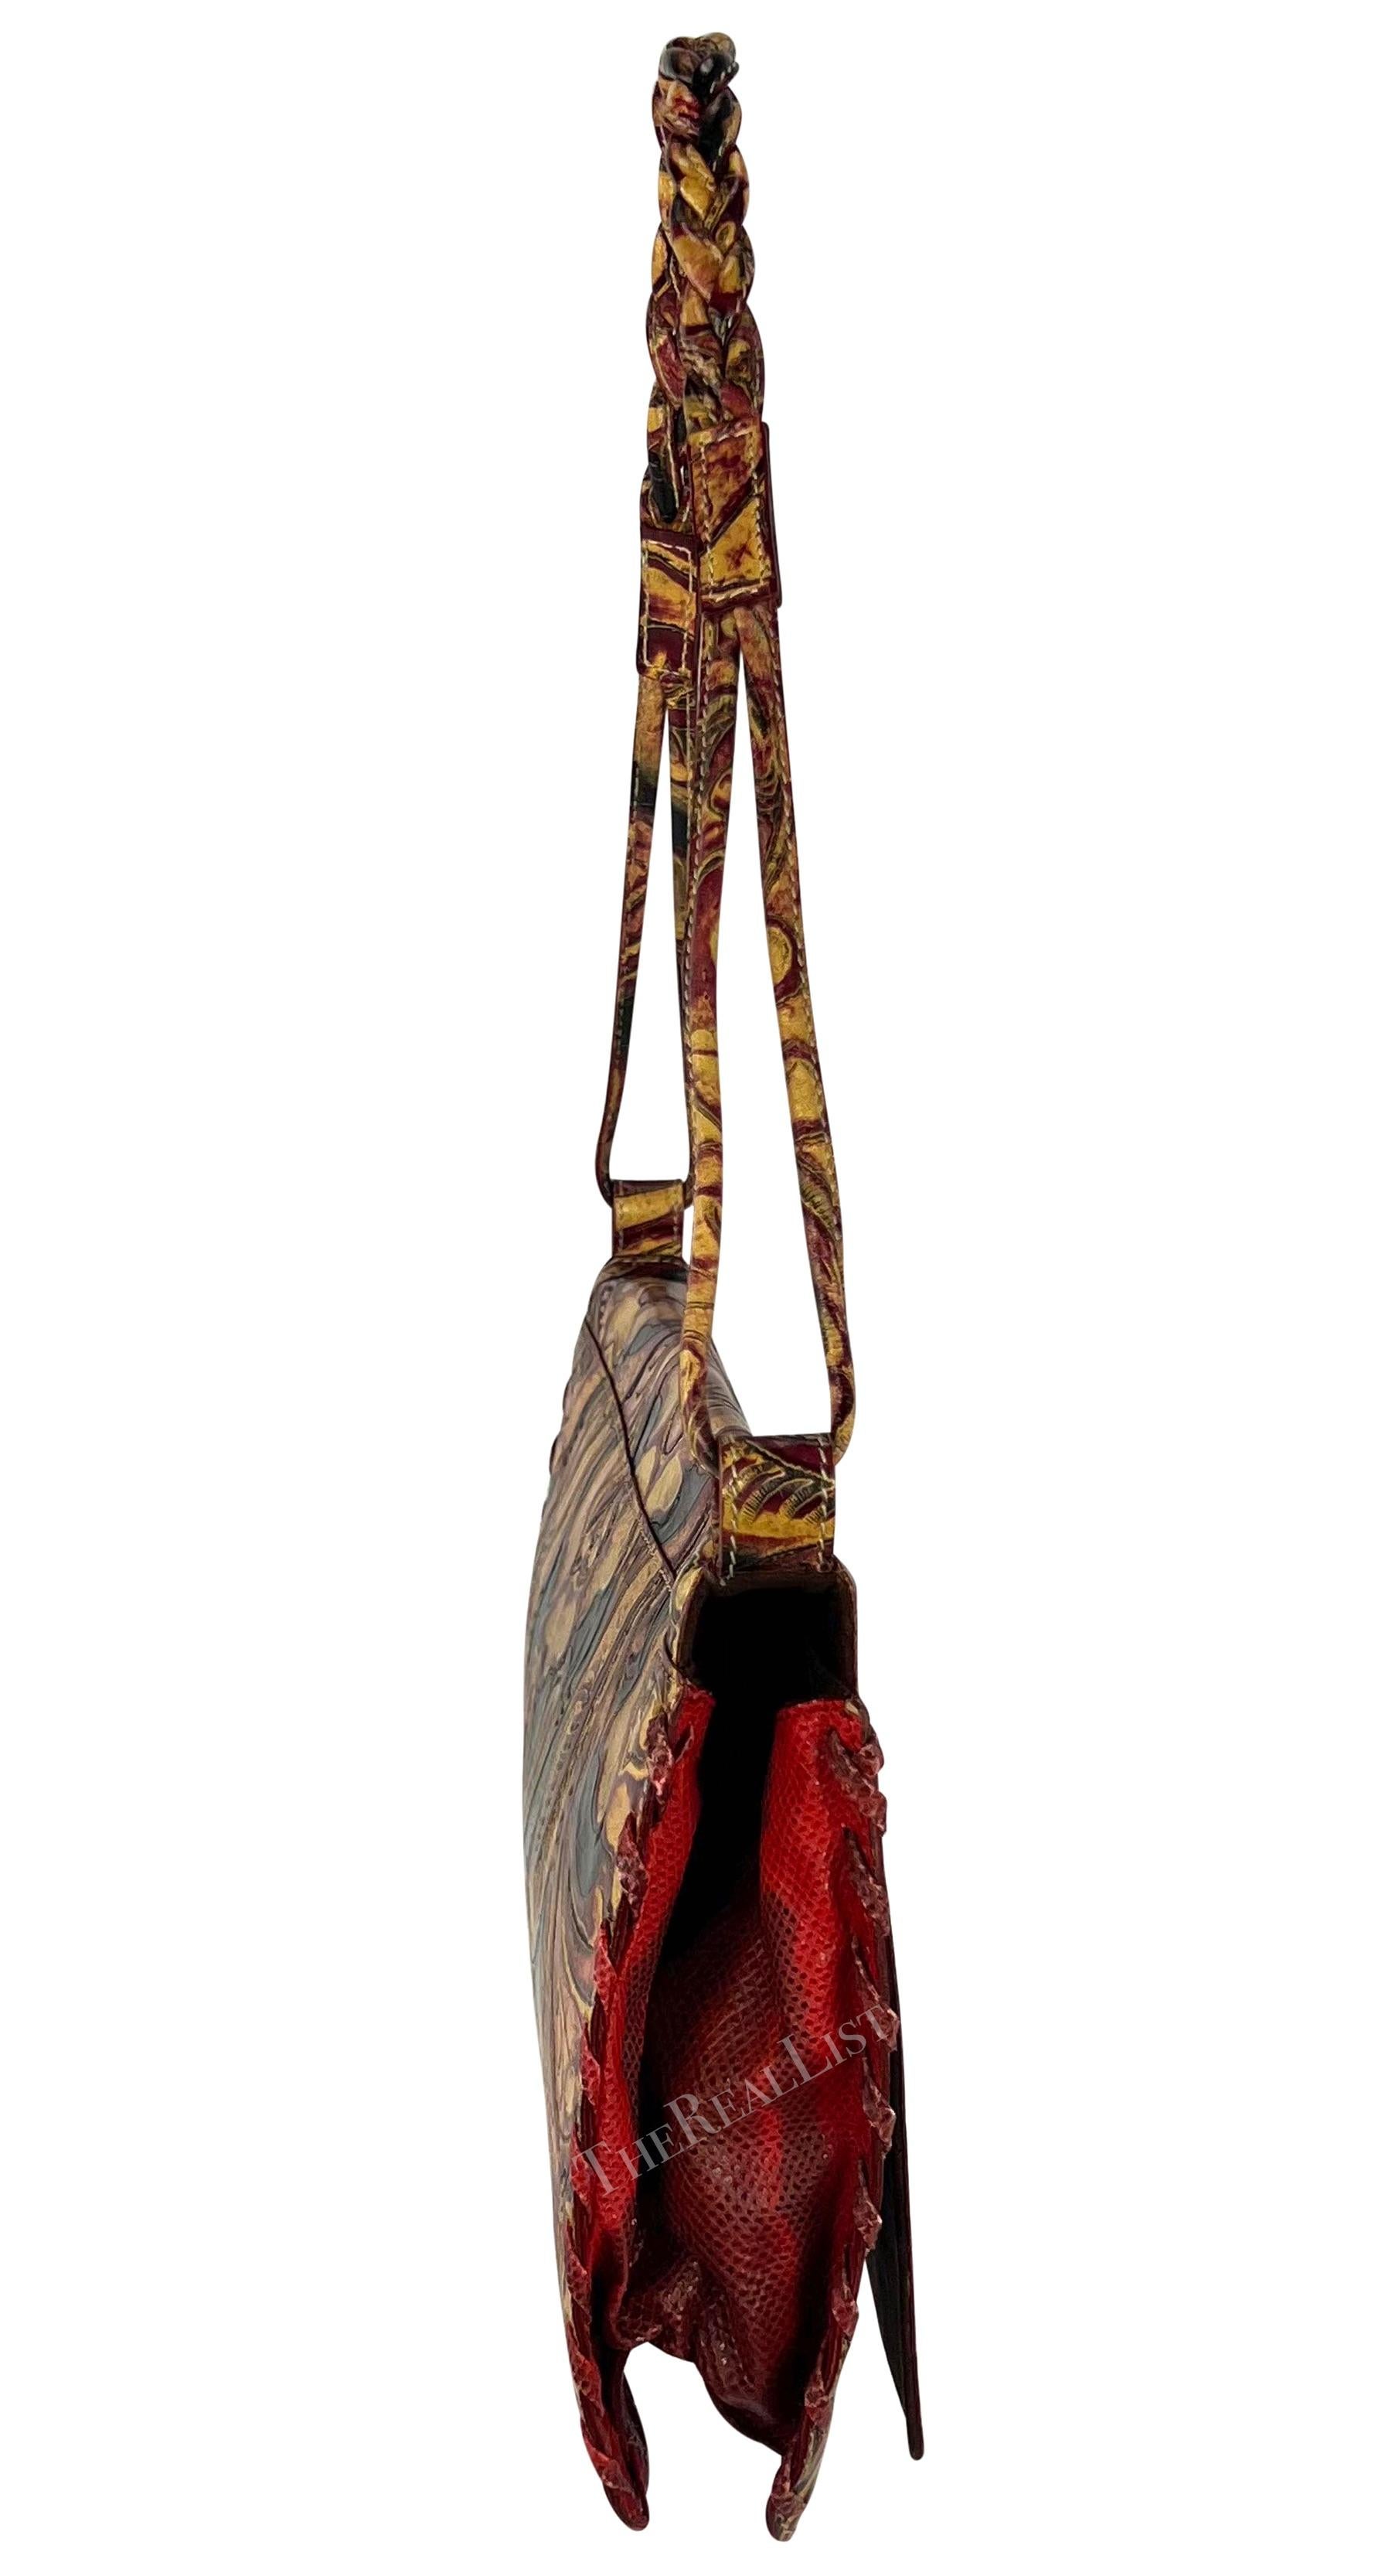 Presenting a tan and red carved leather Emanuel Ungaro shoulder bag. From the early 2000s, this chic bag is constructed entirely of tan, red, and black leather with a carved floral pattern. The bag is made complete with a flap closure, a thin